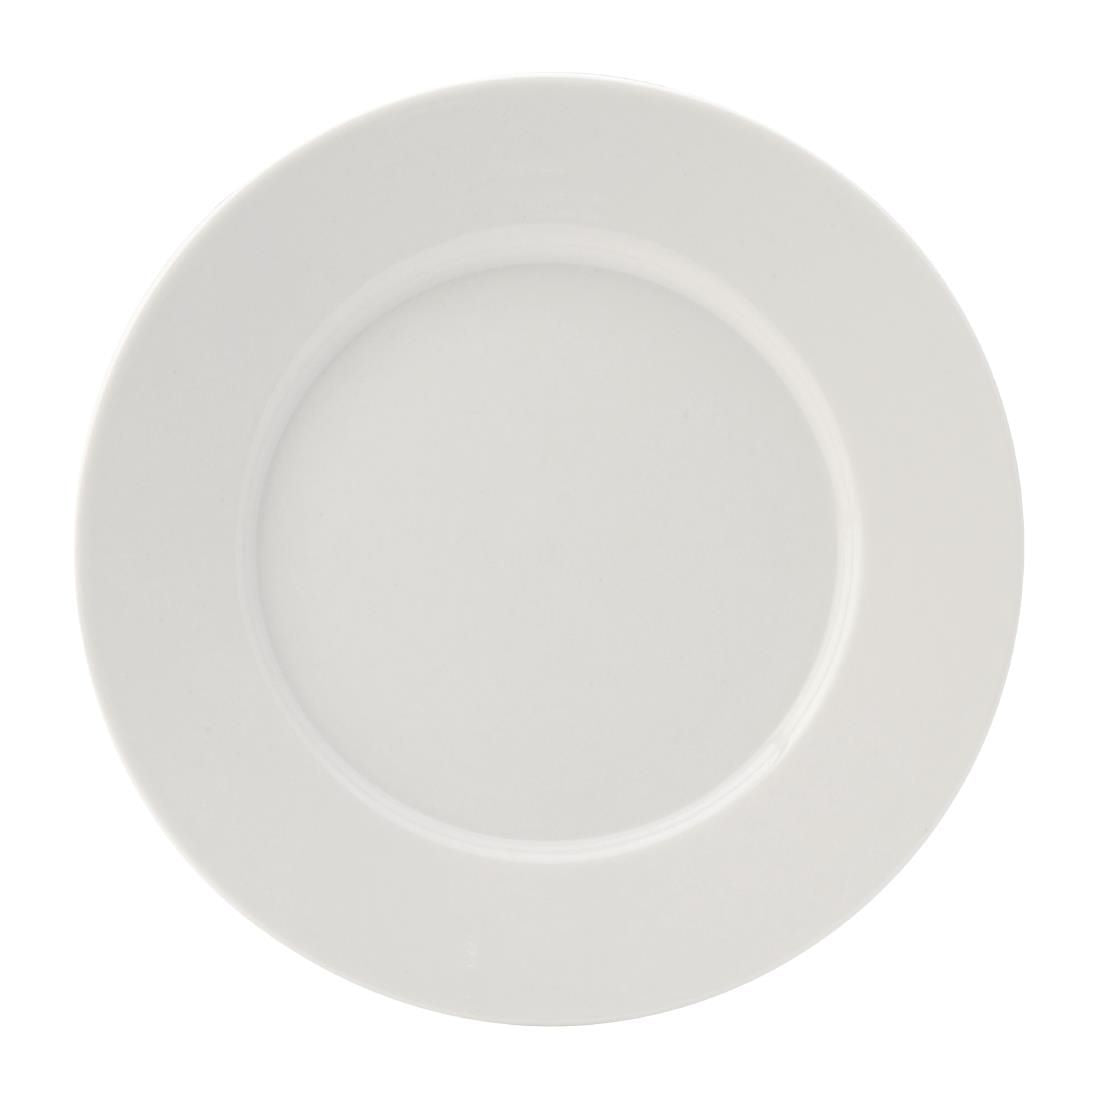 DY340 Utopia Titan Winged Plates White 170mm (Pack of 36)